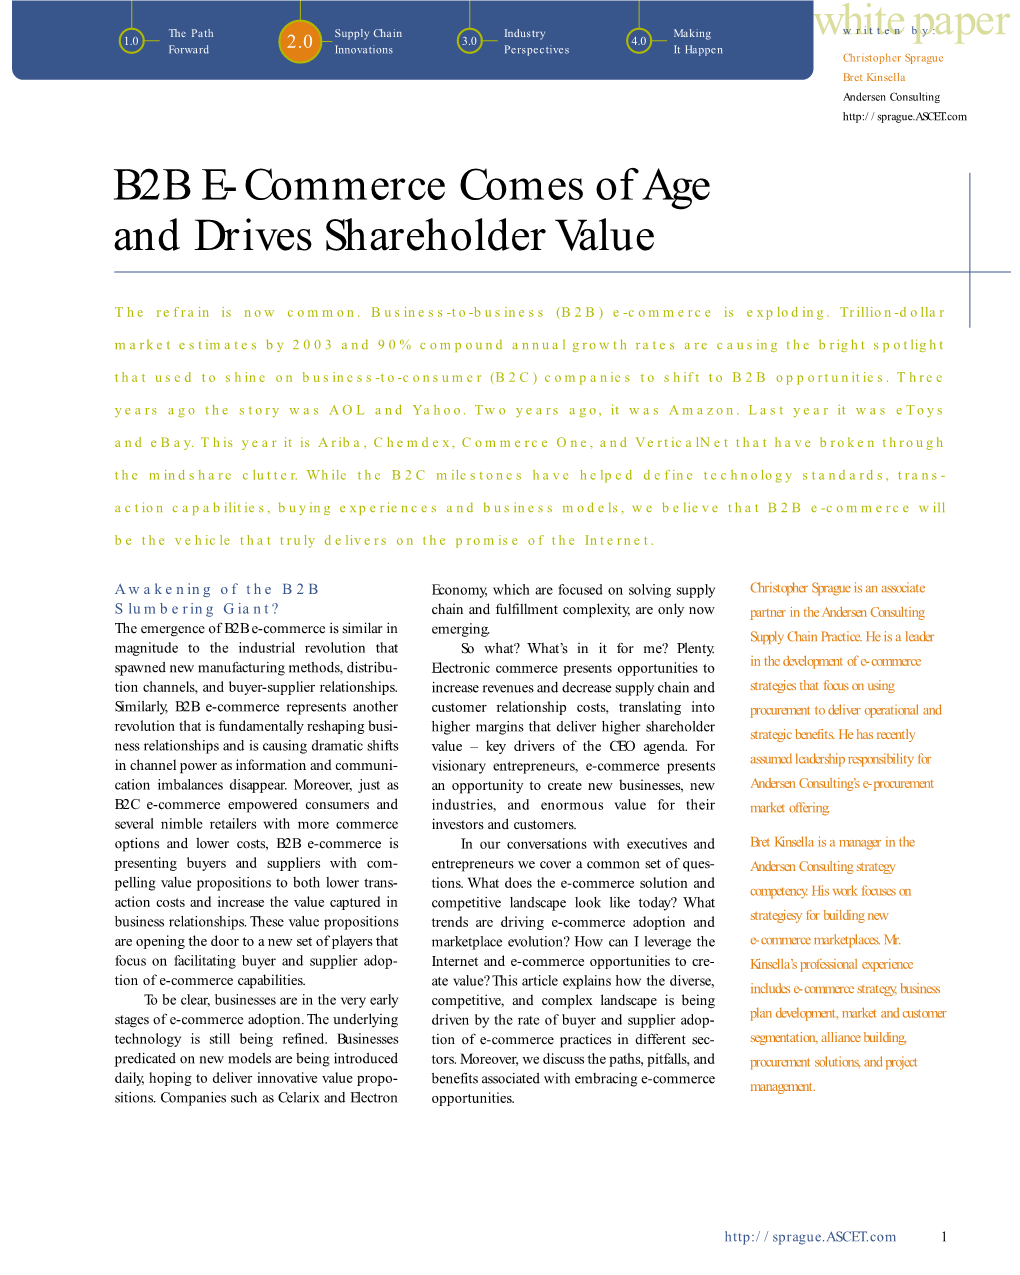 Whitepaper B2B E-Commerce Comes of Age and Drives Shareholder Value